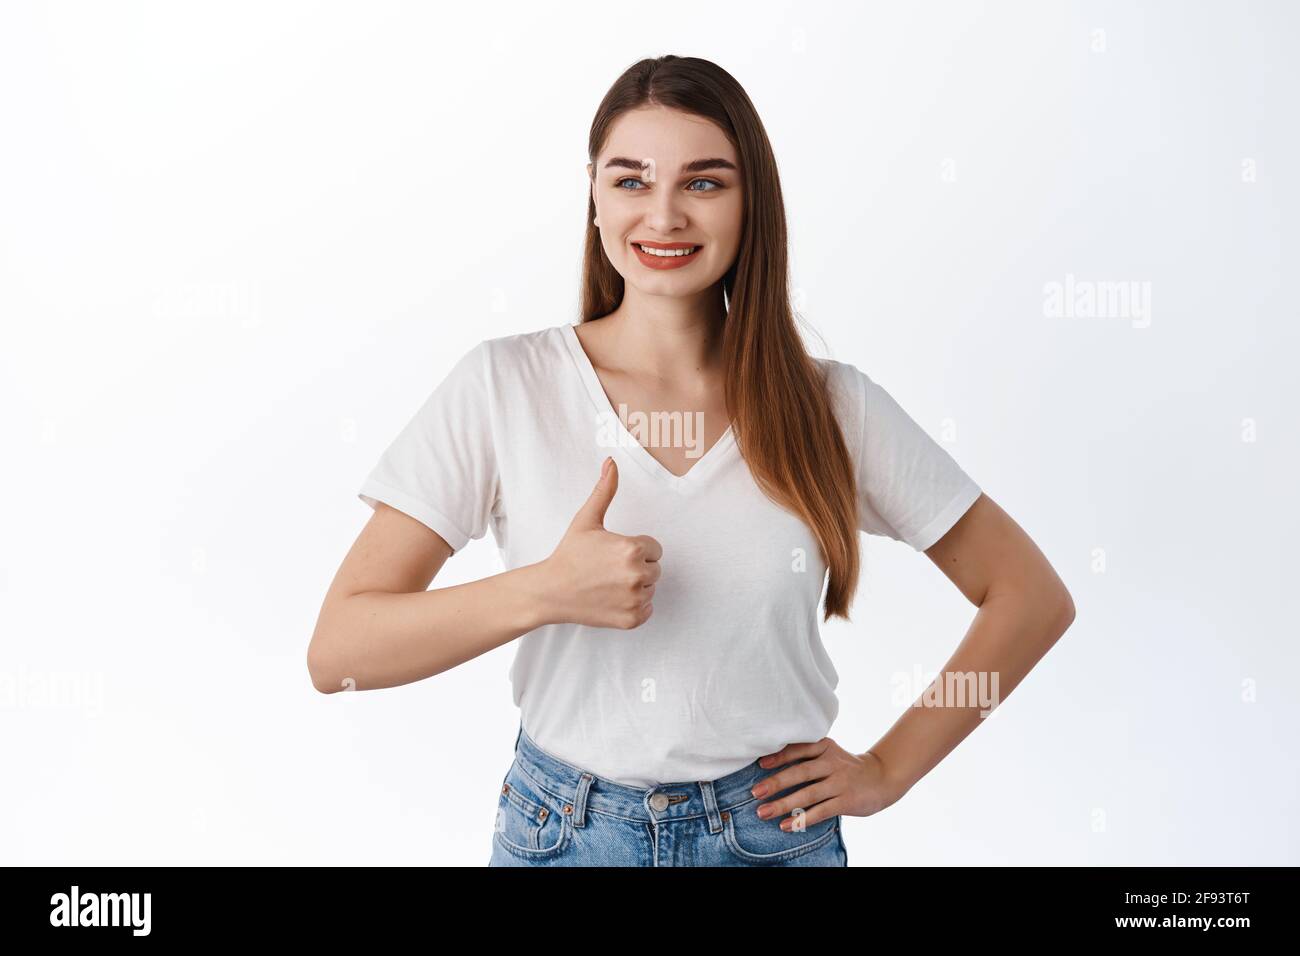 Very good. Smiling young woman looking aside at promo offer and shows thumbs up in approval, praise good shop deal, nice advertisement, satisfied with Stock Photo